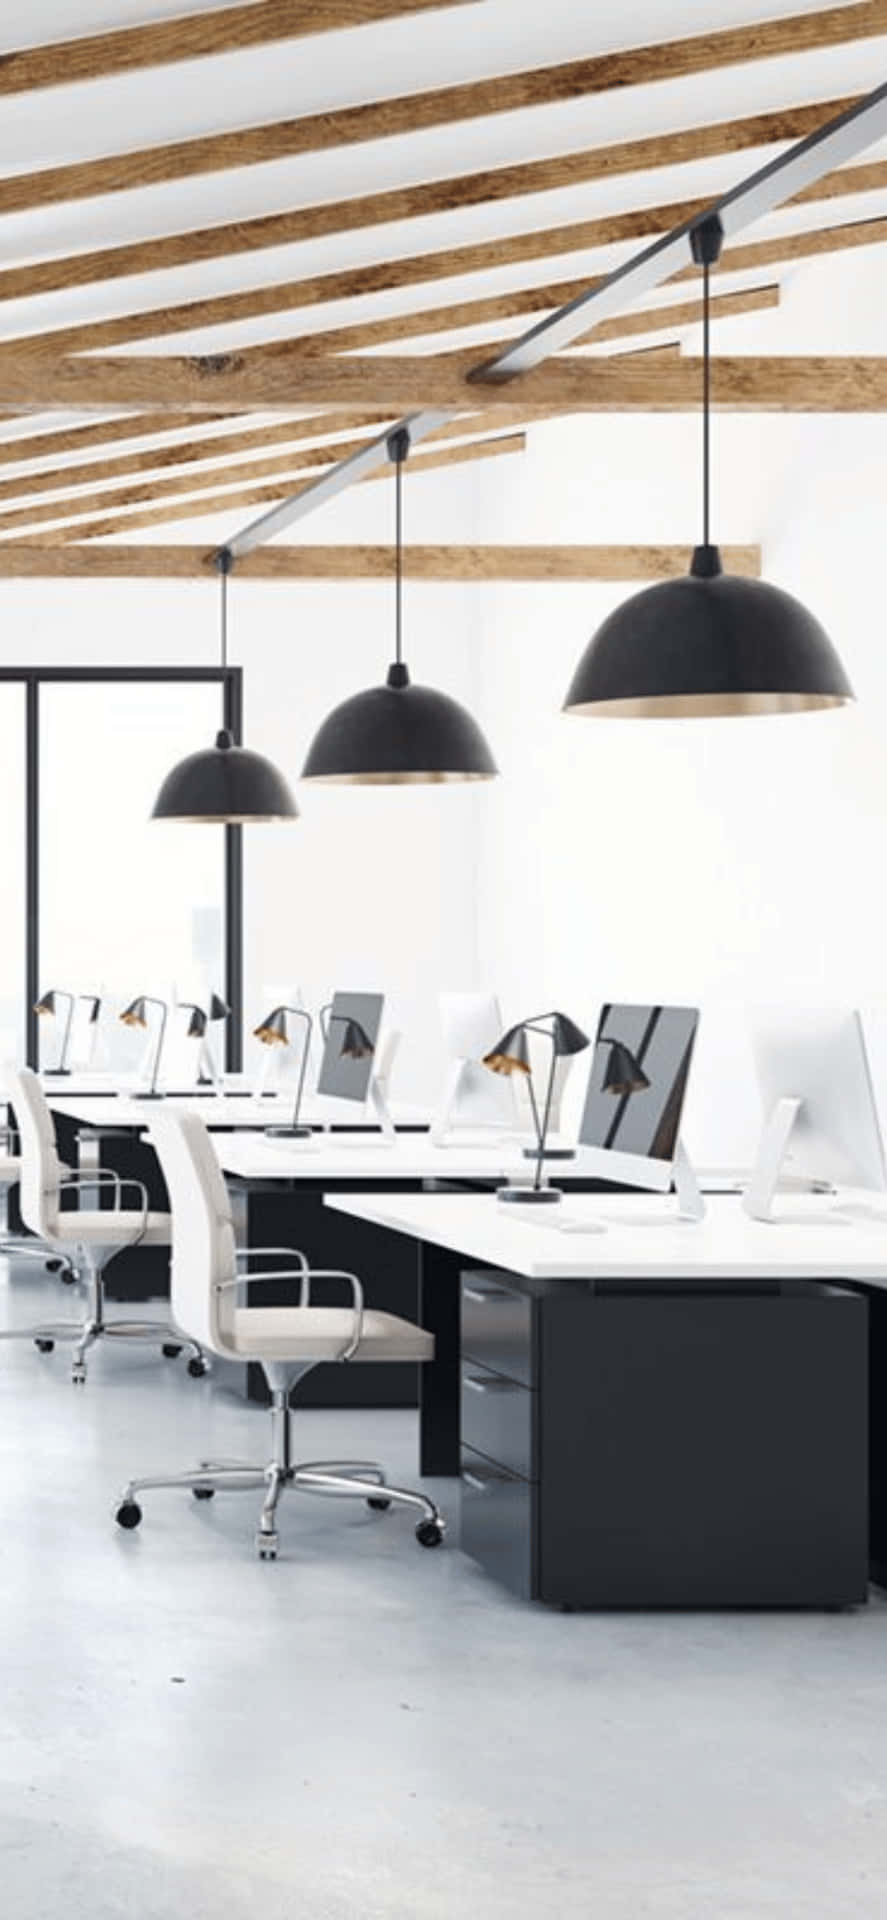 Pendant Lights iPhone X Office Background